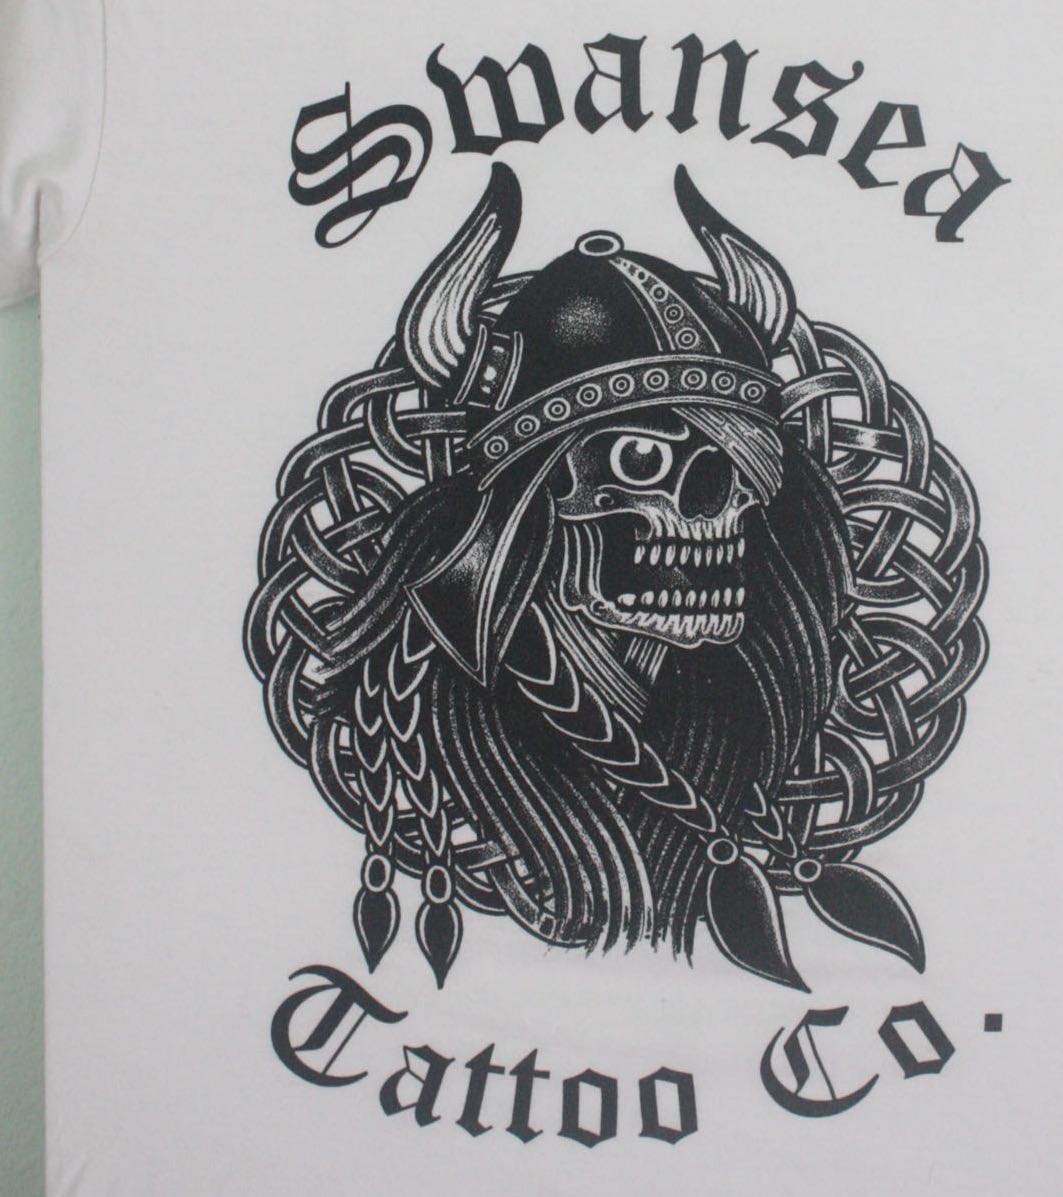 Tattoo Shop T-Shirts: What You See is What You Get